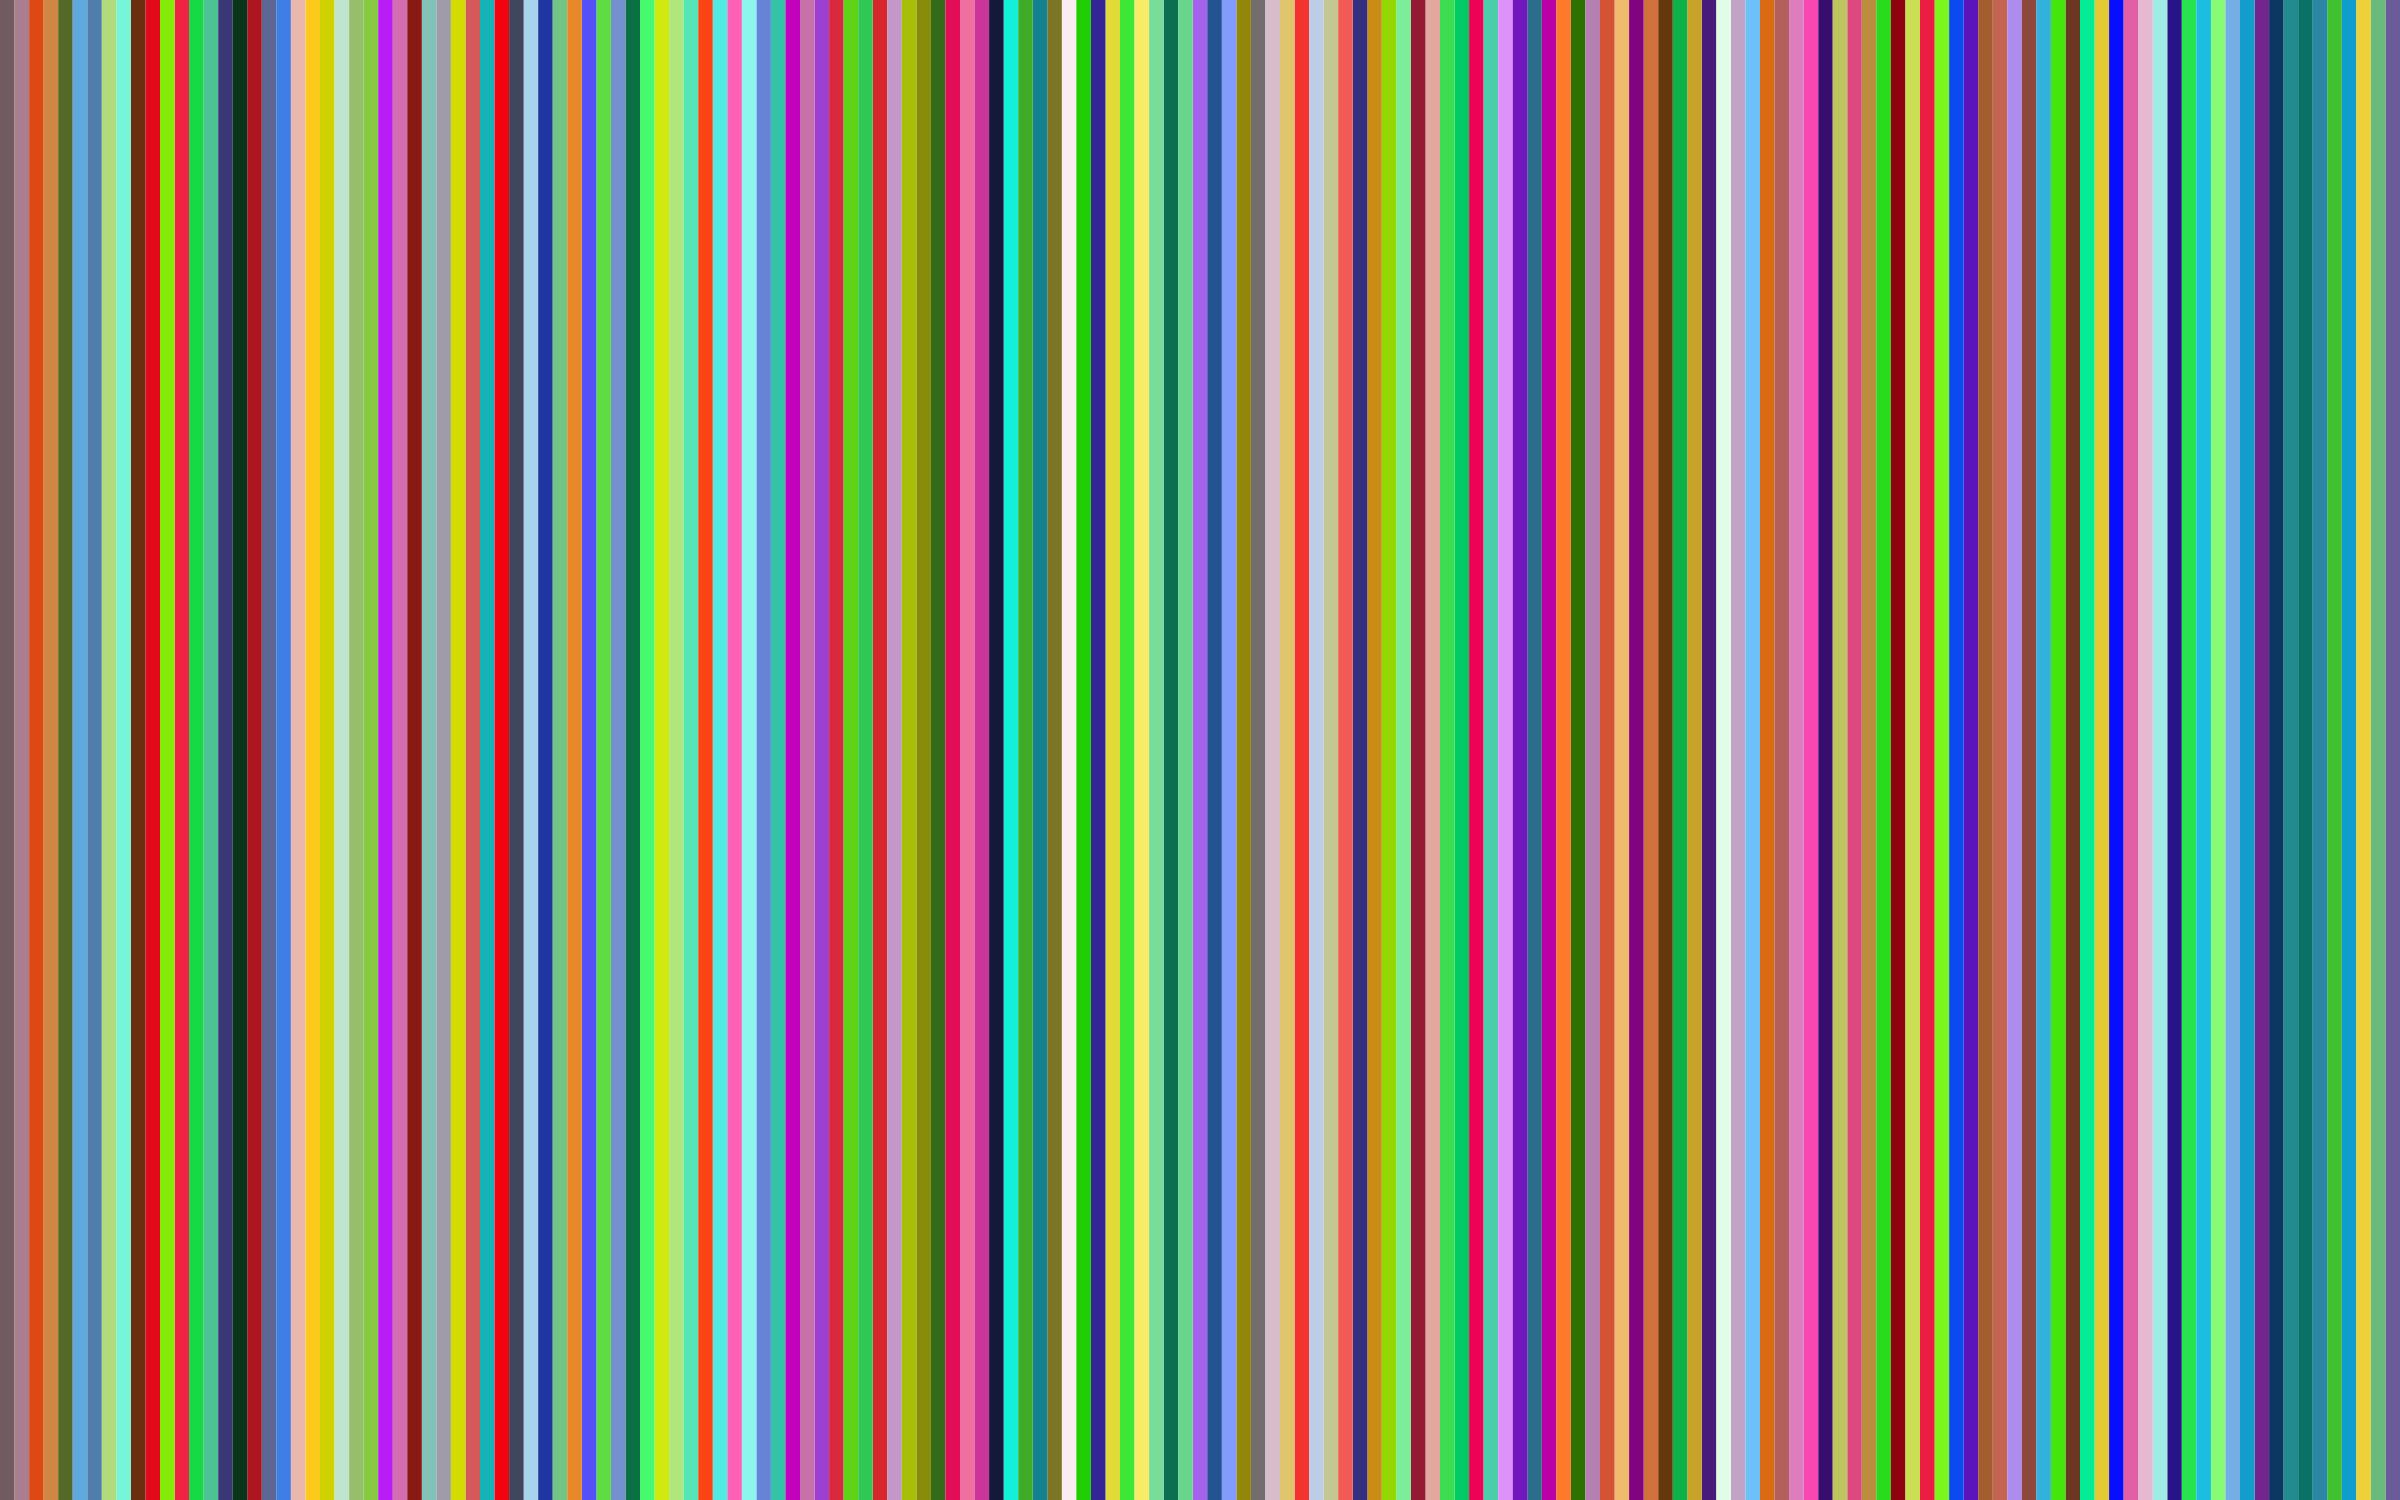 https://iconspng.com/images/colorful-stripes-background/colorful-stripes-background.jpg